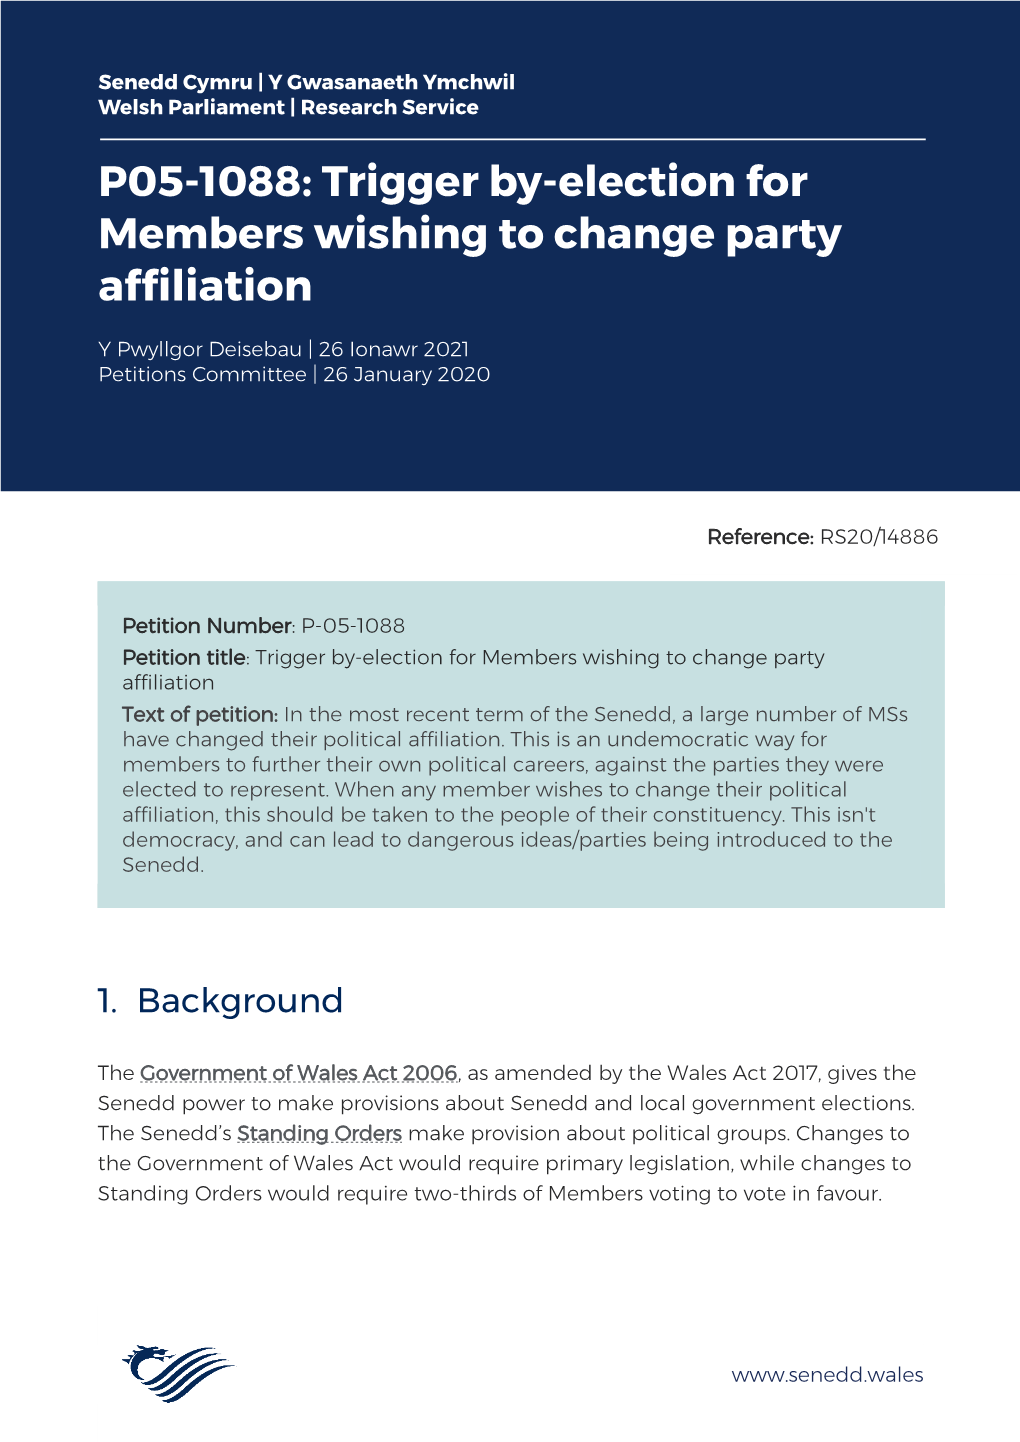 P05-1088: Trigger By-Election for Members Wishing to Change Party Affiliation